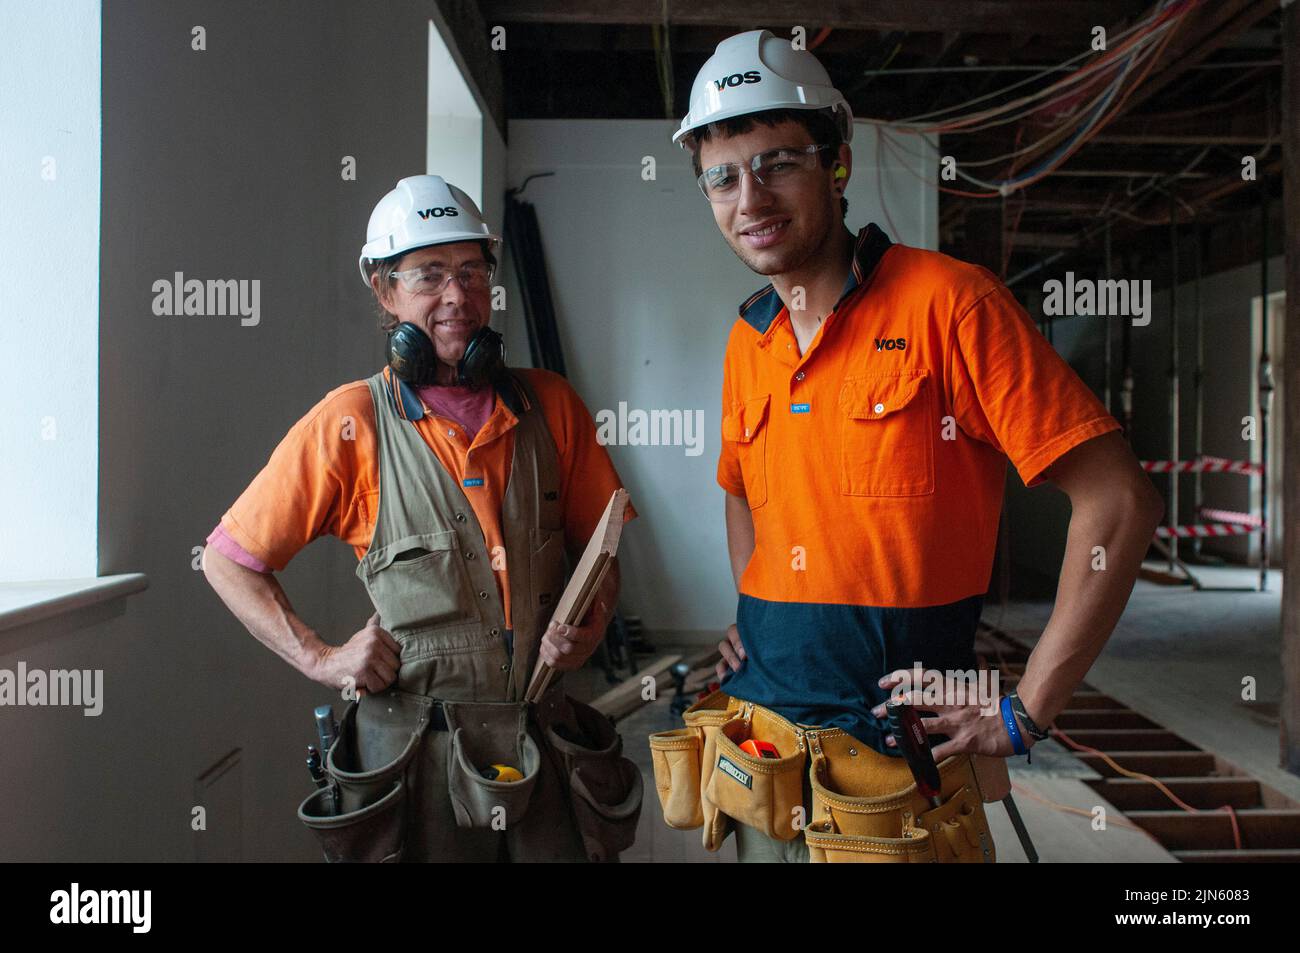 Carpenter and you apprentice working on the renovation of the Tasmanian Museum and aArt Gallery un Hobart Stock Photo